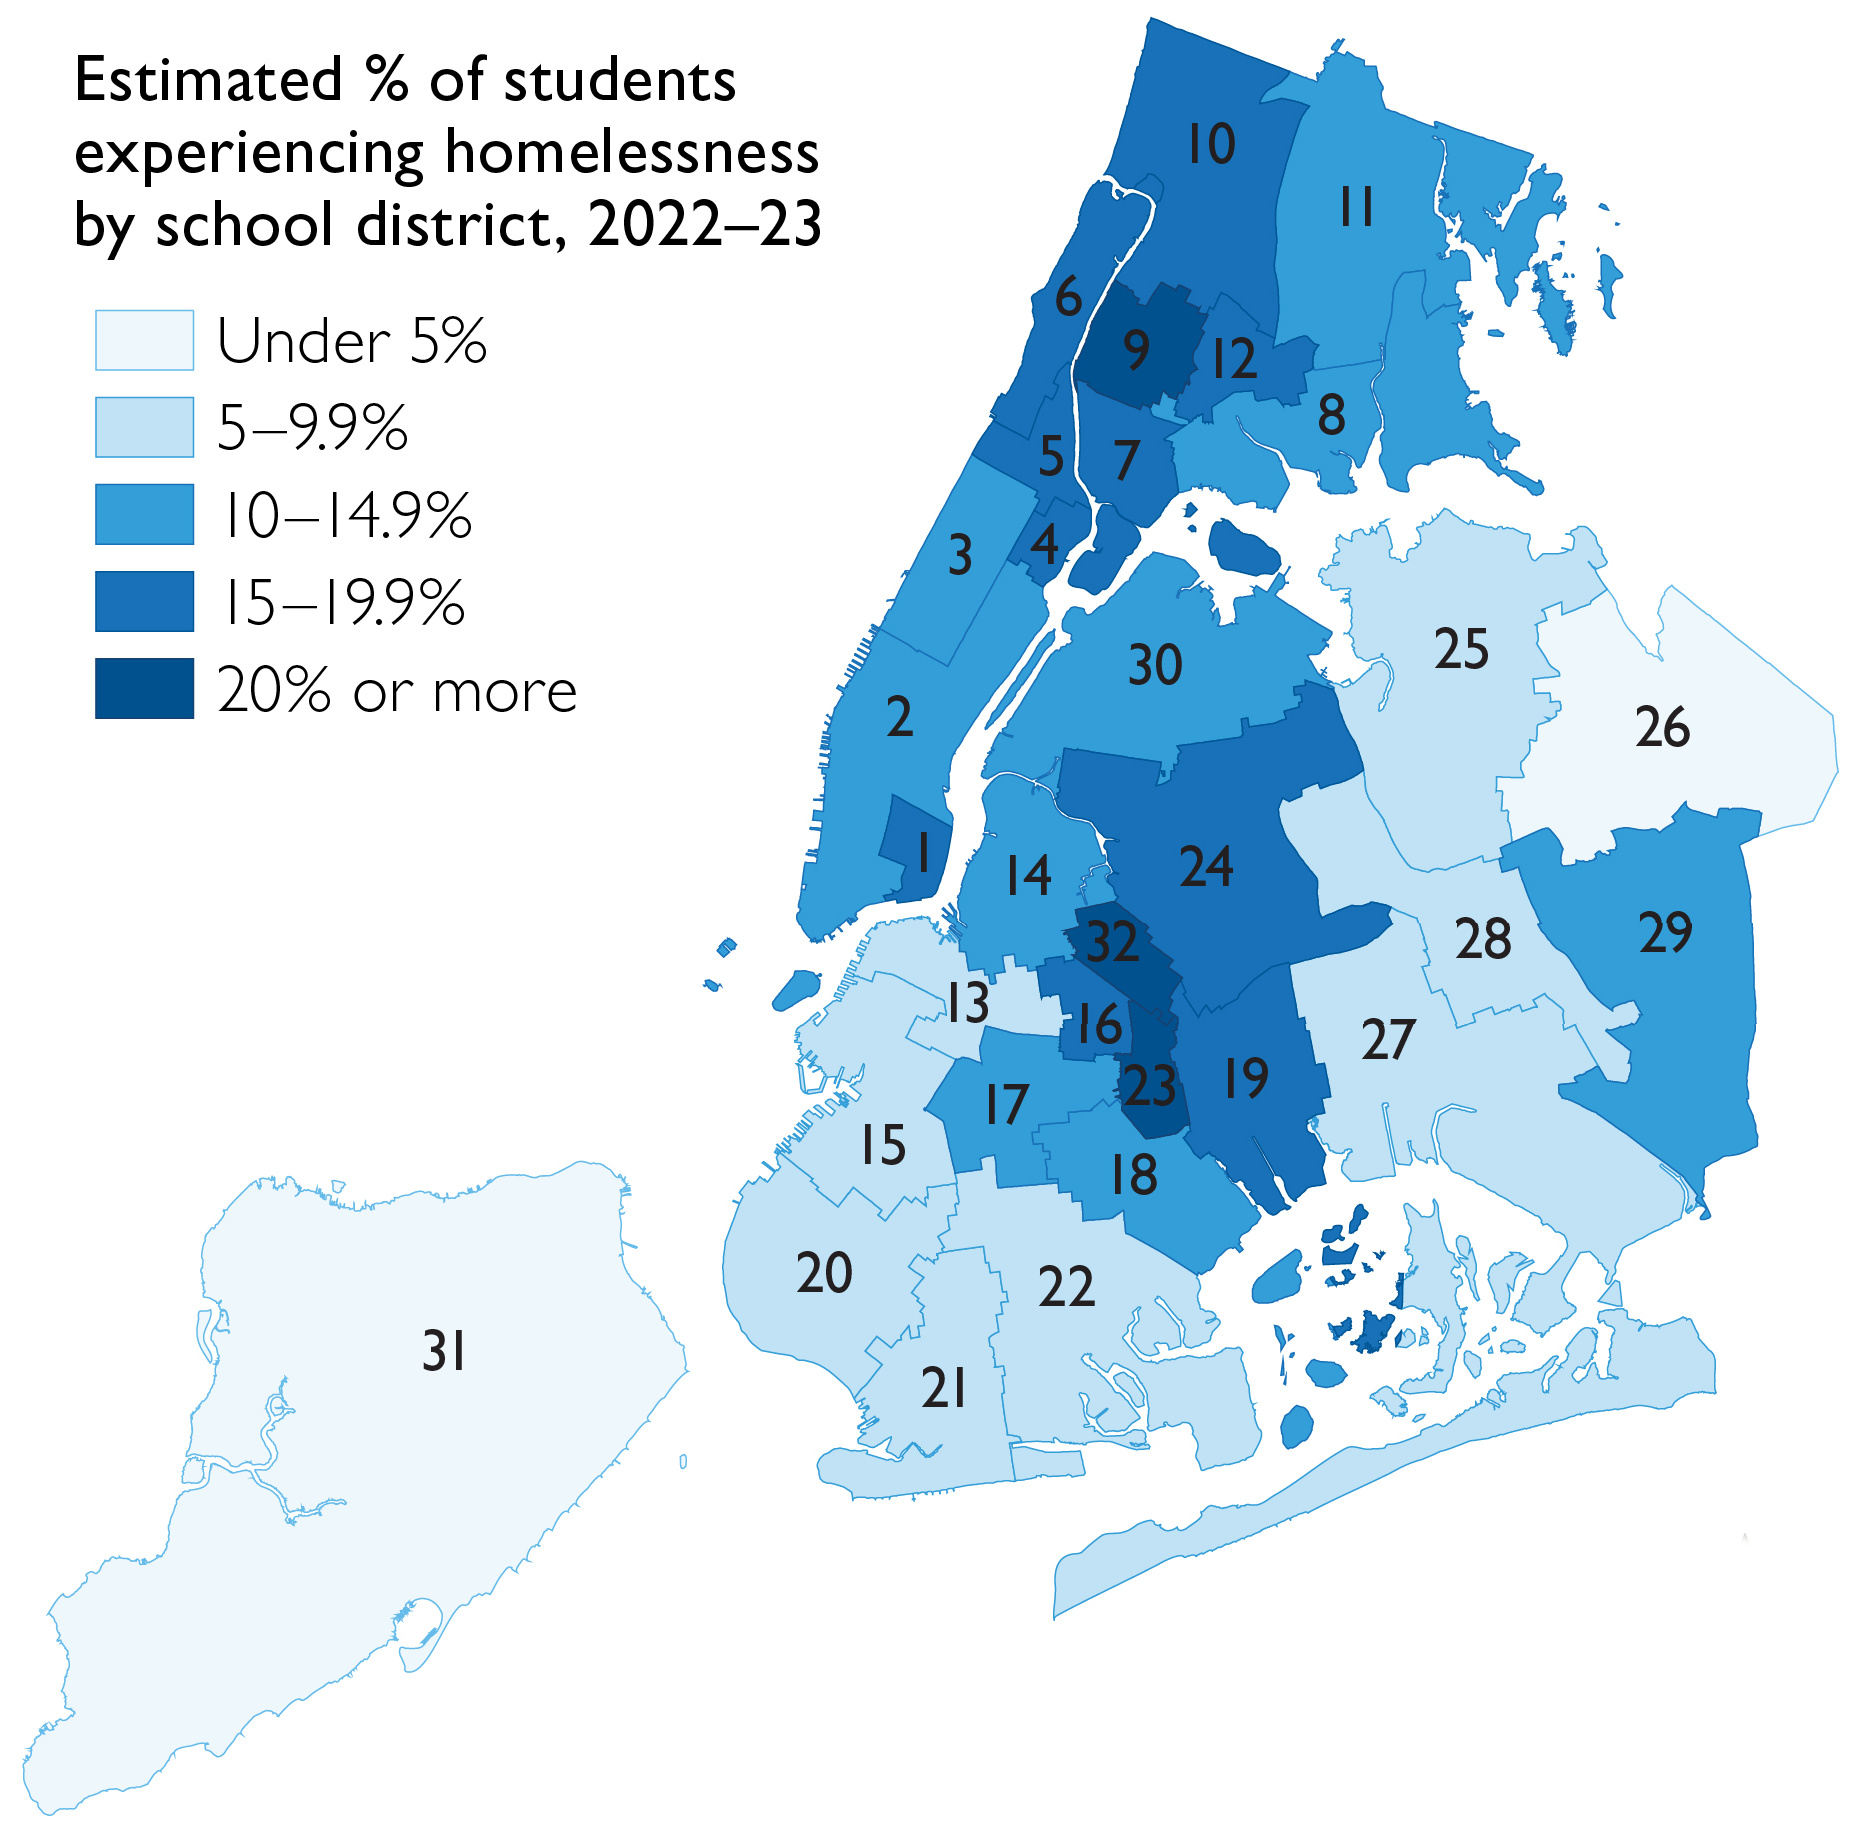 Map of NYC by school district, shaded to indicate the estimated % of students experiencing homelessness in each district in 2022-23; shows particularly high rates of student homelessness in upper Manhattan, the Bronx, and districts 23 and 32 in Brooklyn.